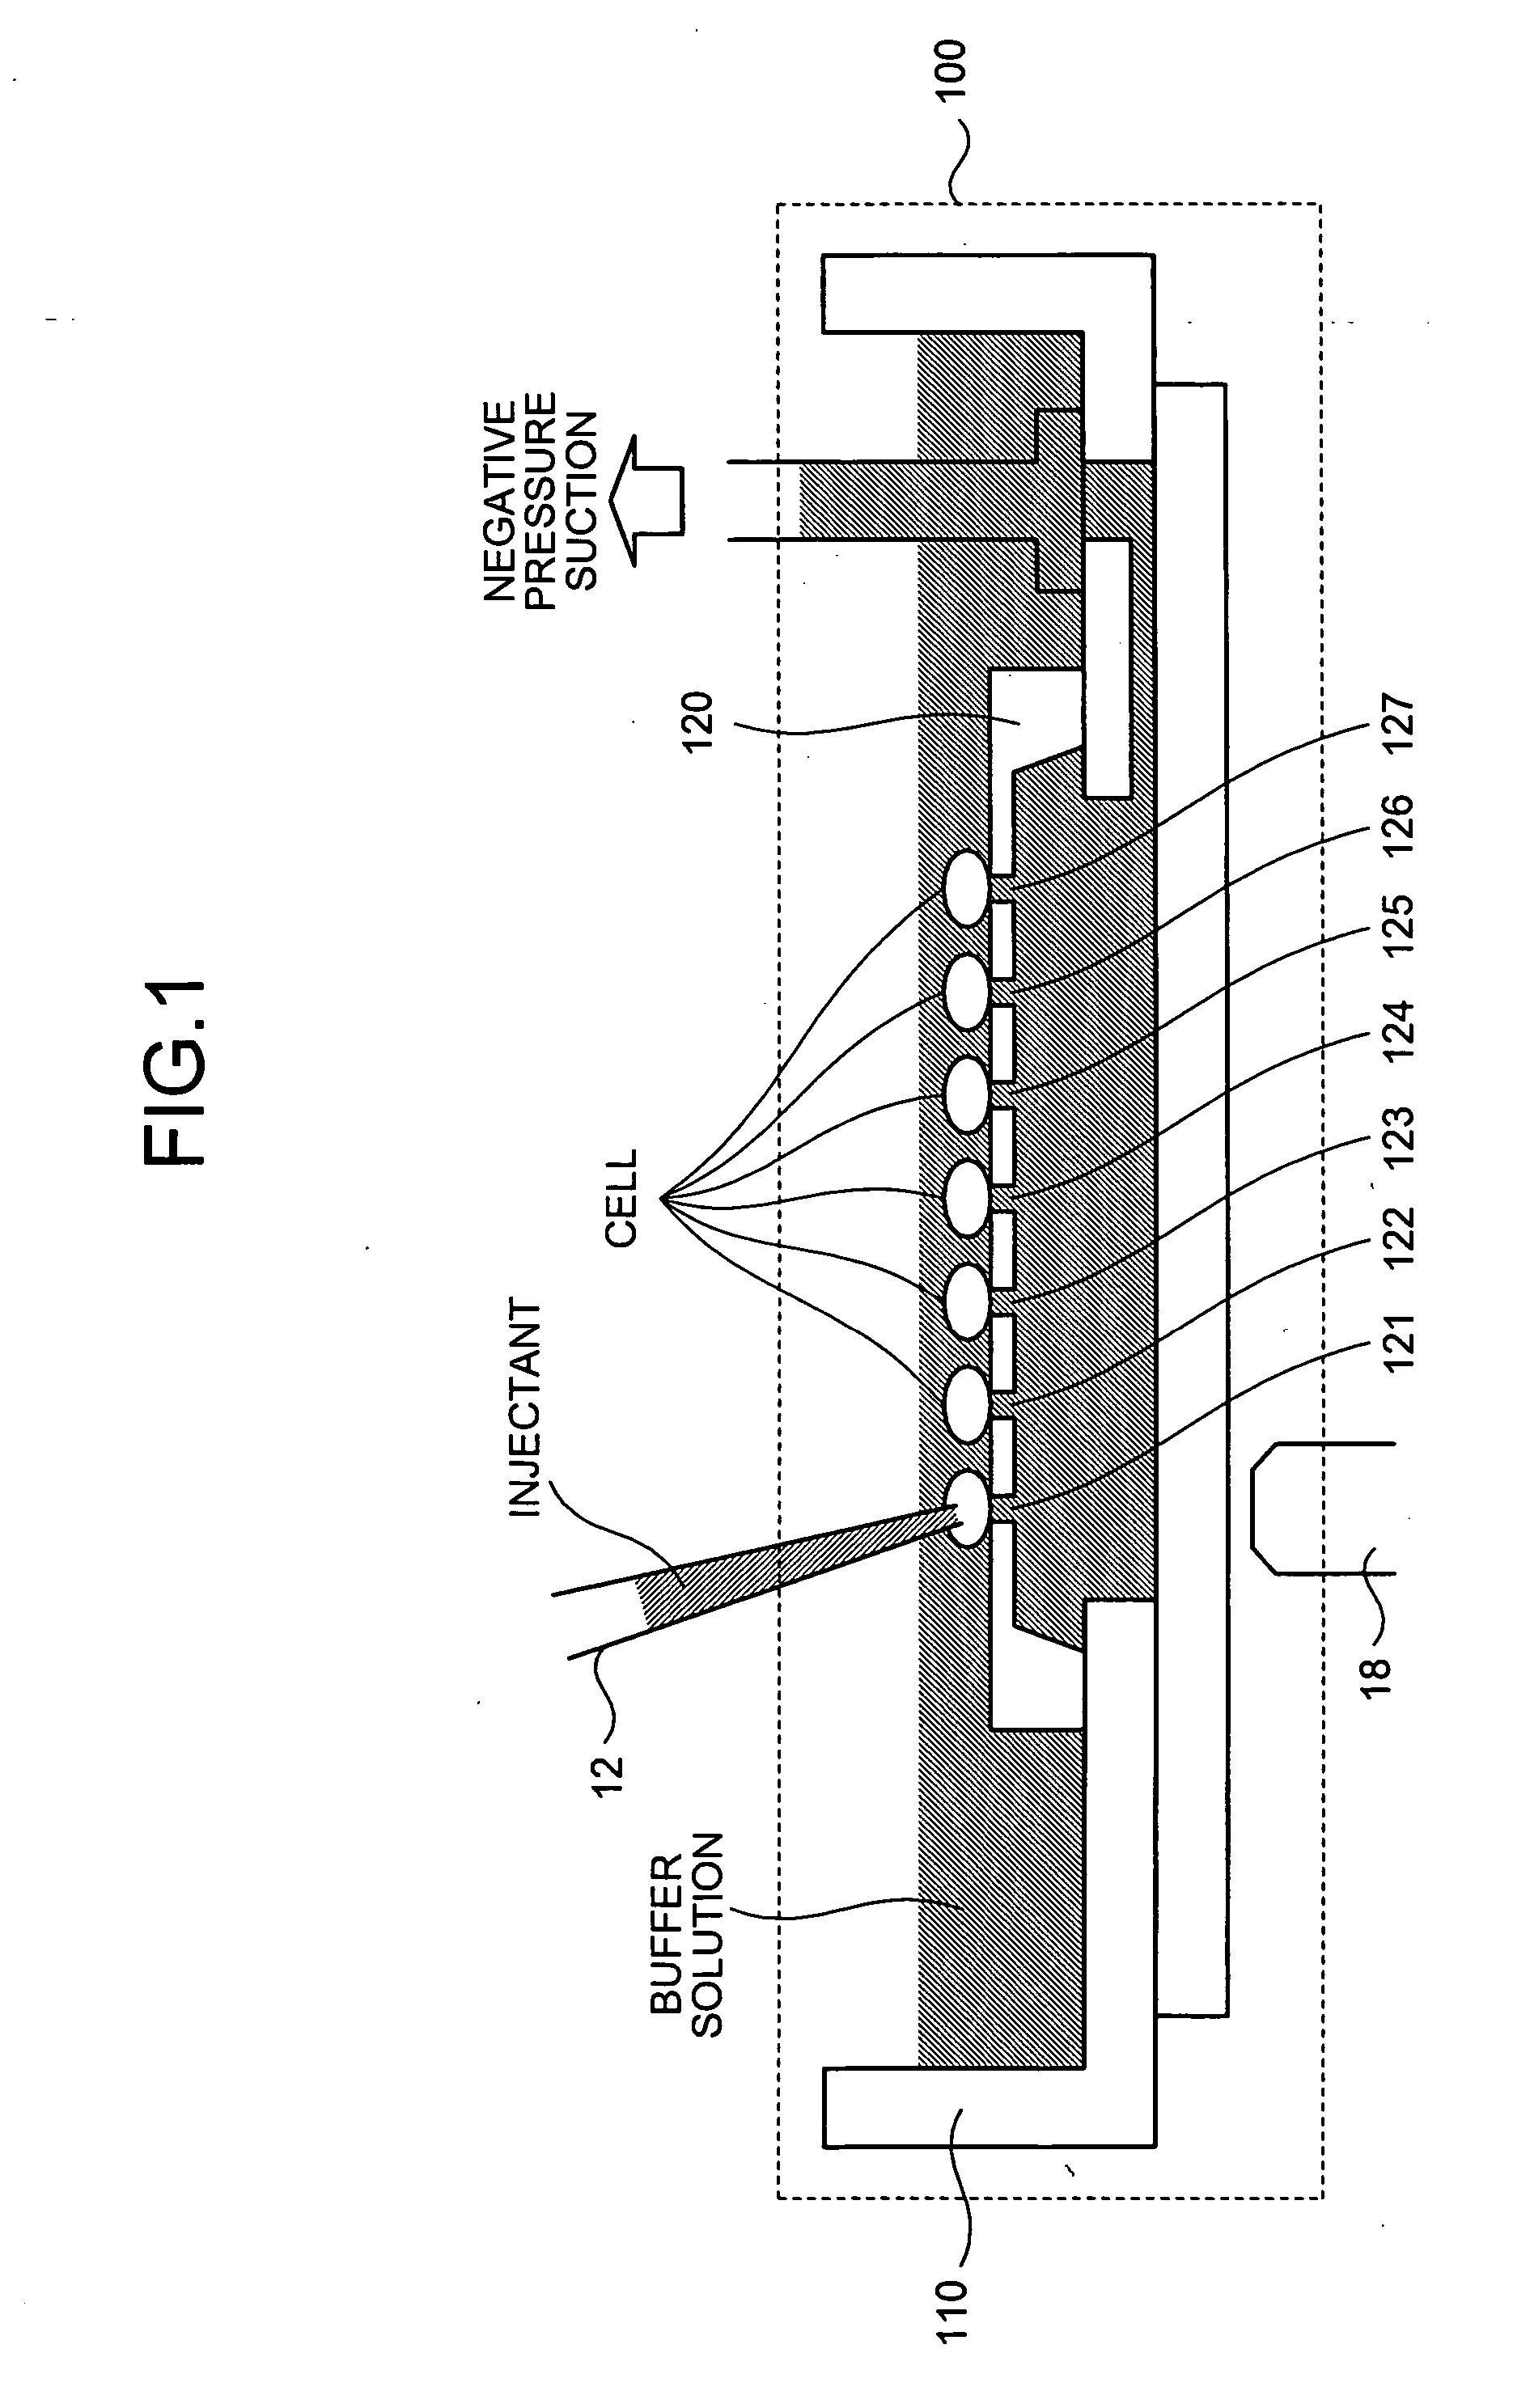 Automatic macroinjection apparatus and cell trapping plate